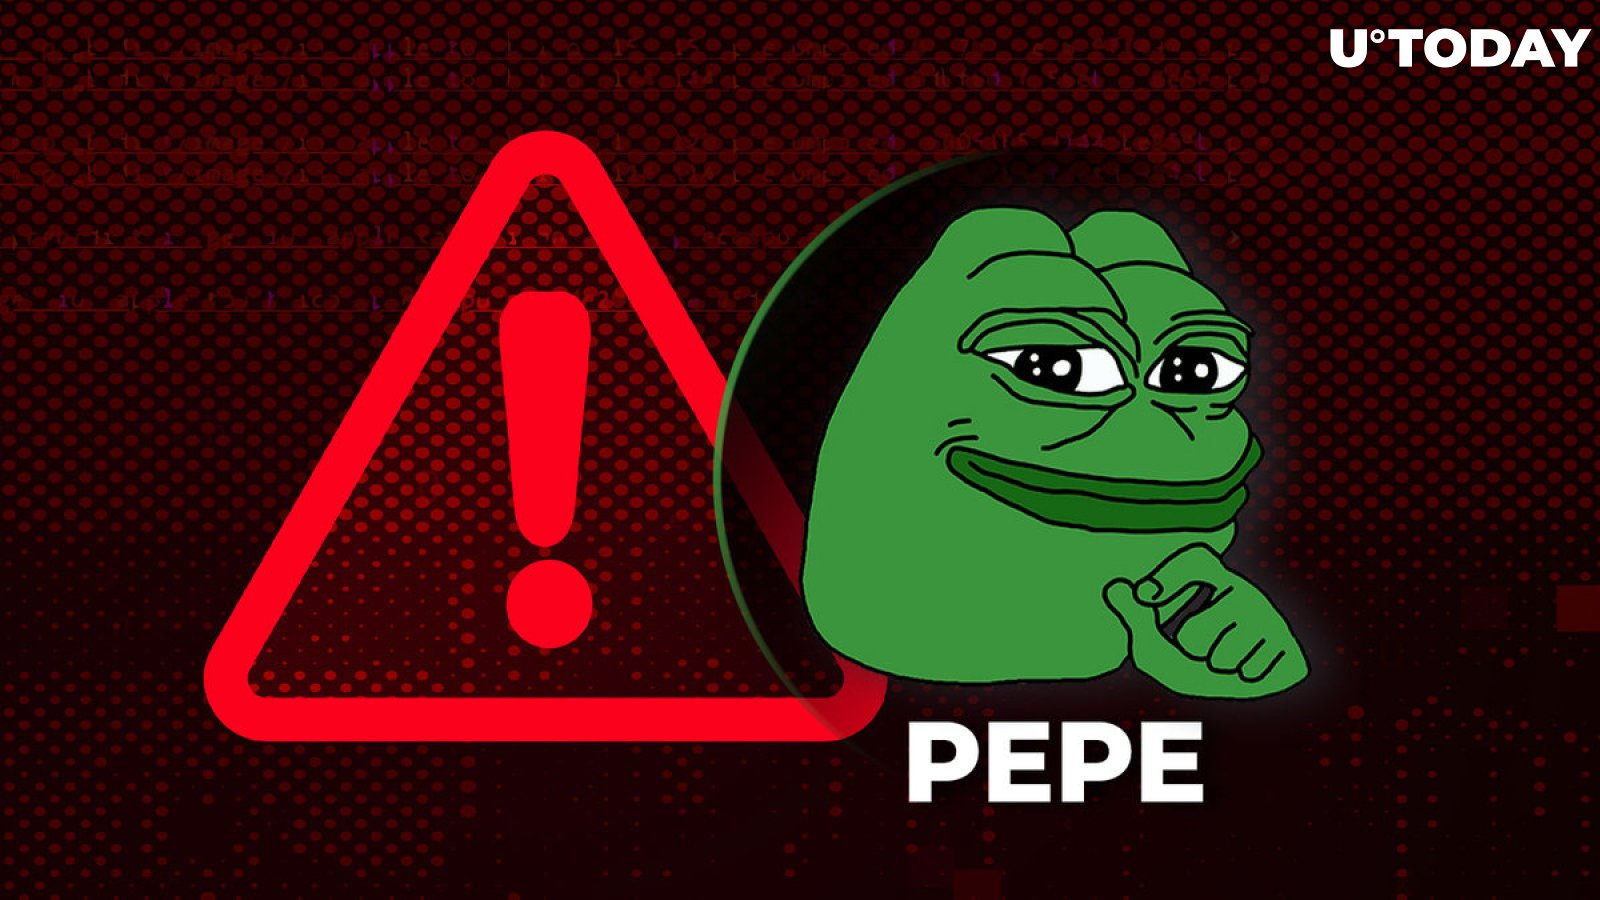 Warning: Pepe Holders Can Get Blacklisted by PEPE Creator, $850,000 Already Lost